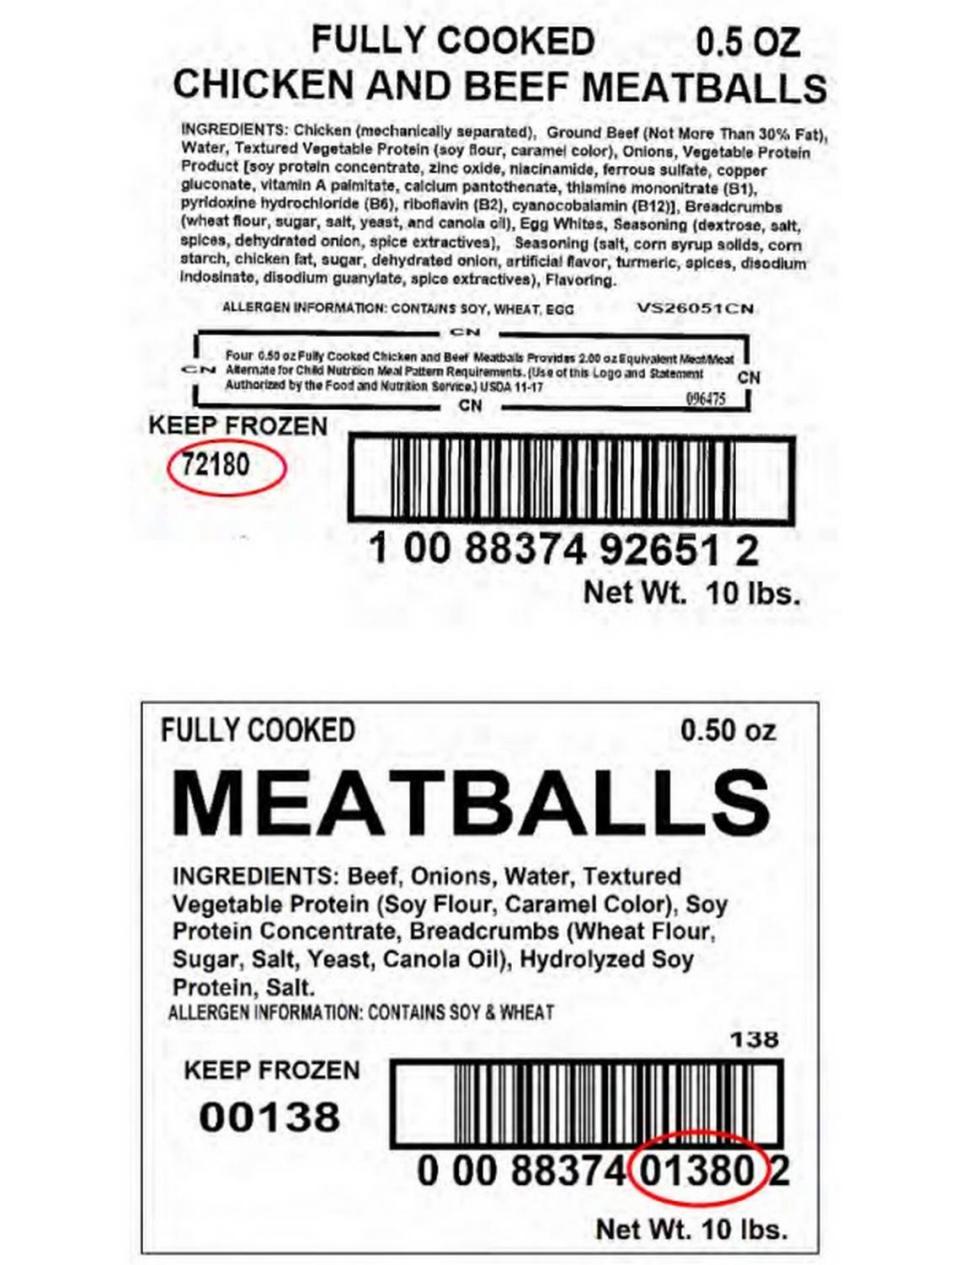 The recalled meatball products, made by King’s Command Foods, a Washington-based company, contain egg, milk, and/or wheat, which are known allergens. These ingredients were not declared on the products’ labels.